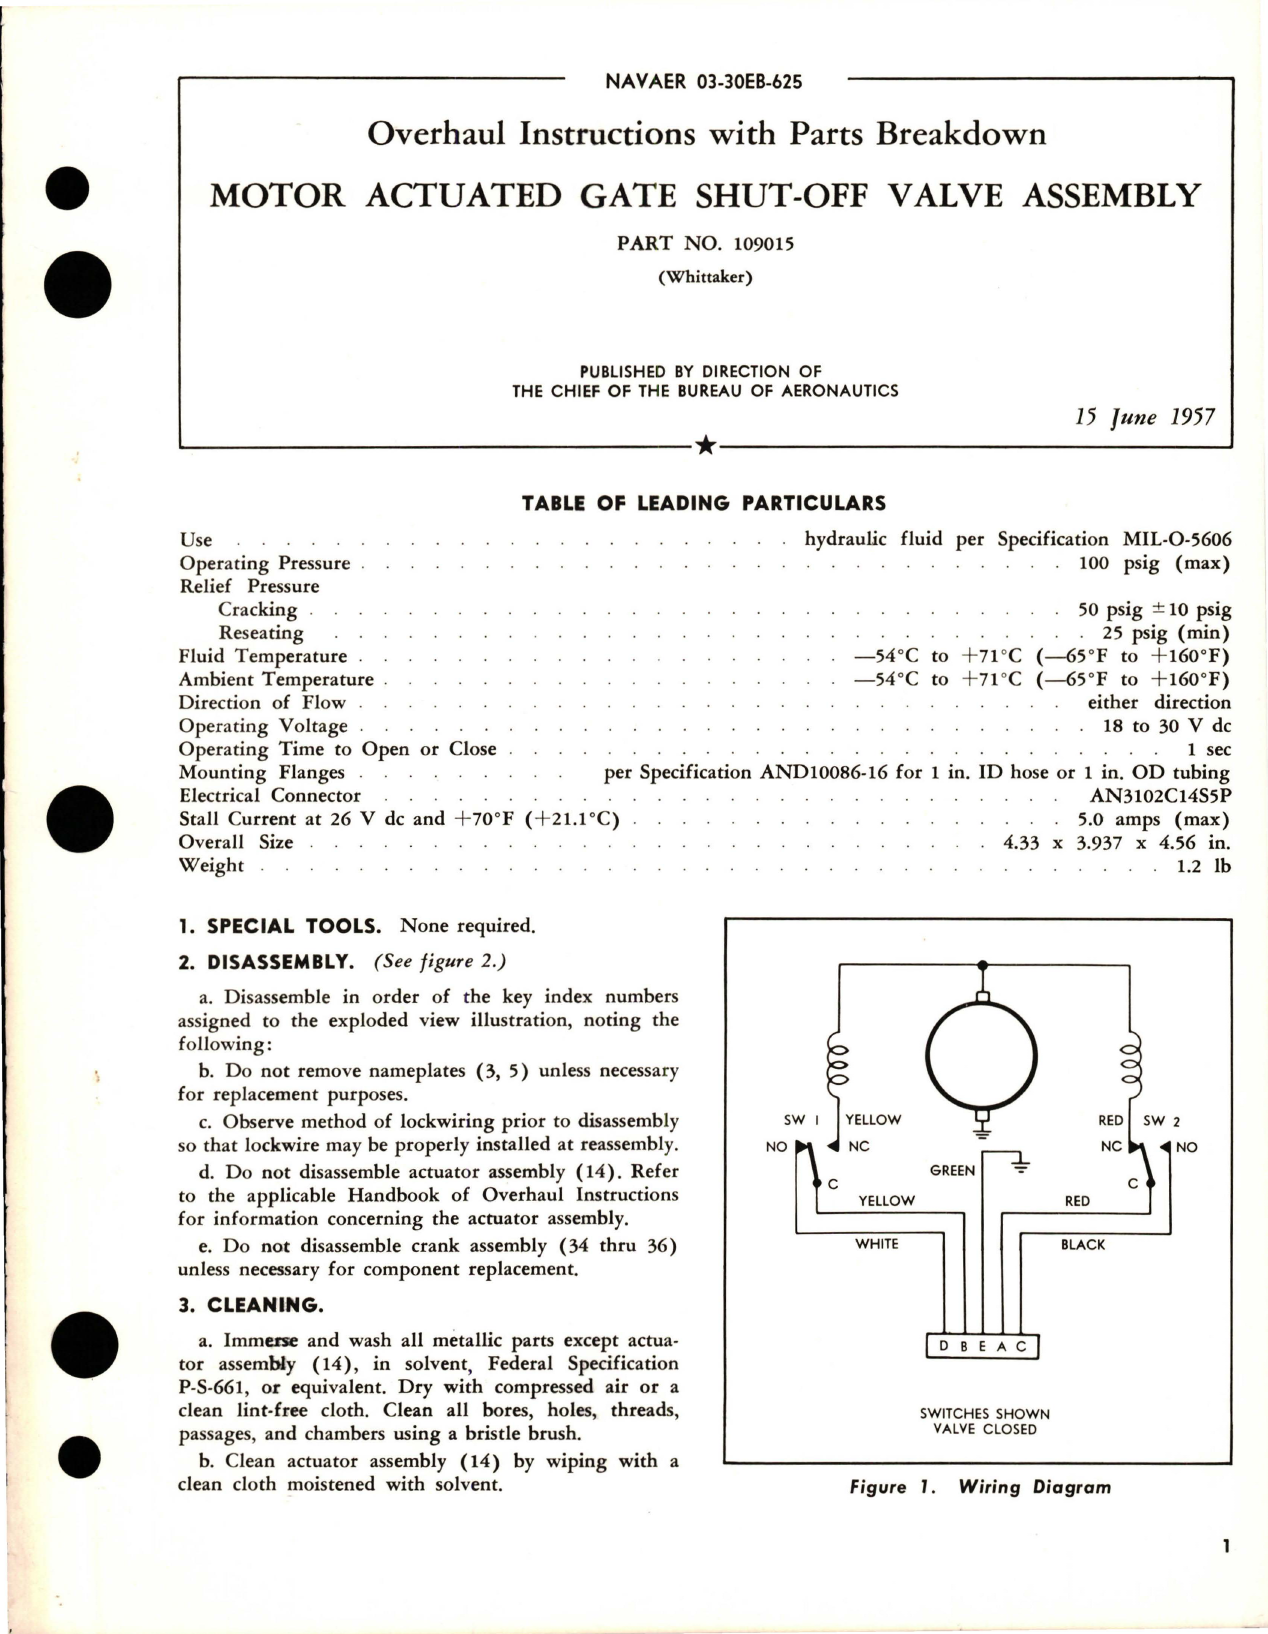 Sample page 1 from AirCorps Library document: Overhaul Instructions with Parts for Motor Actuated Gate Shut Off Valve Assembly - Part 109015